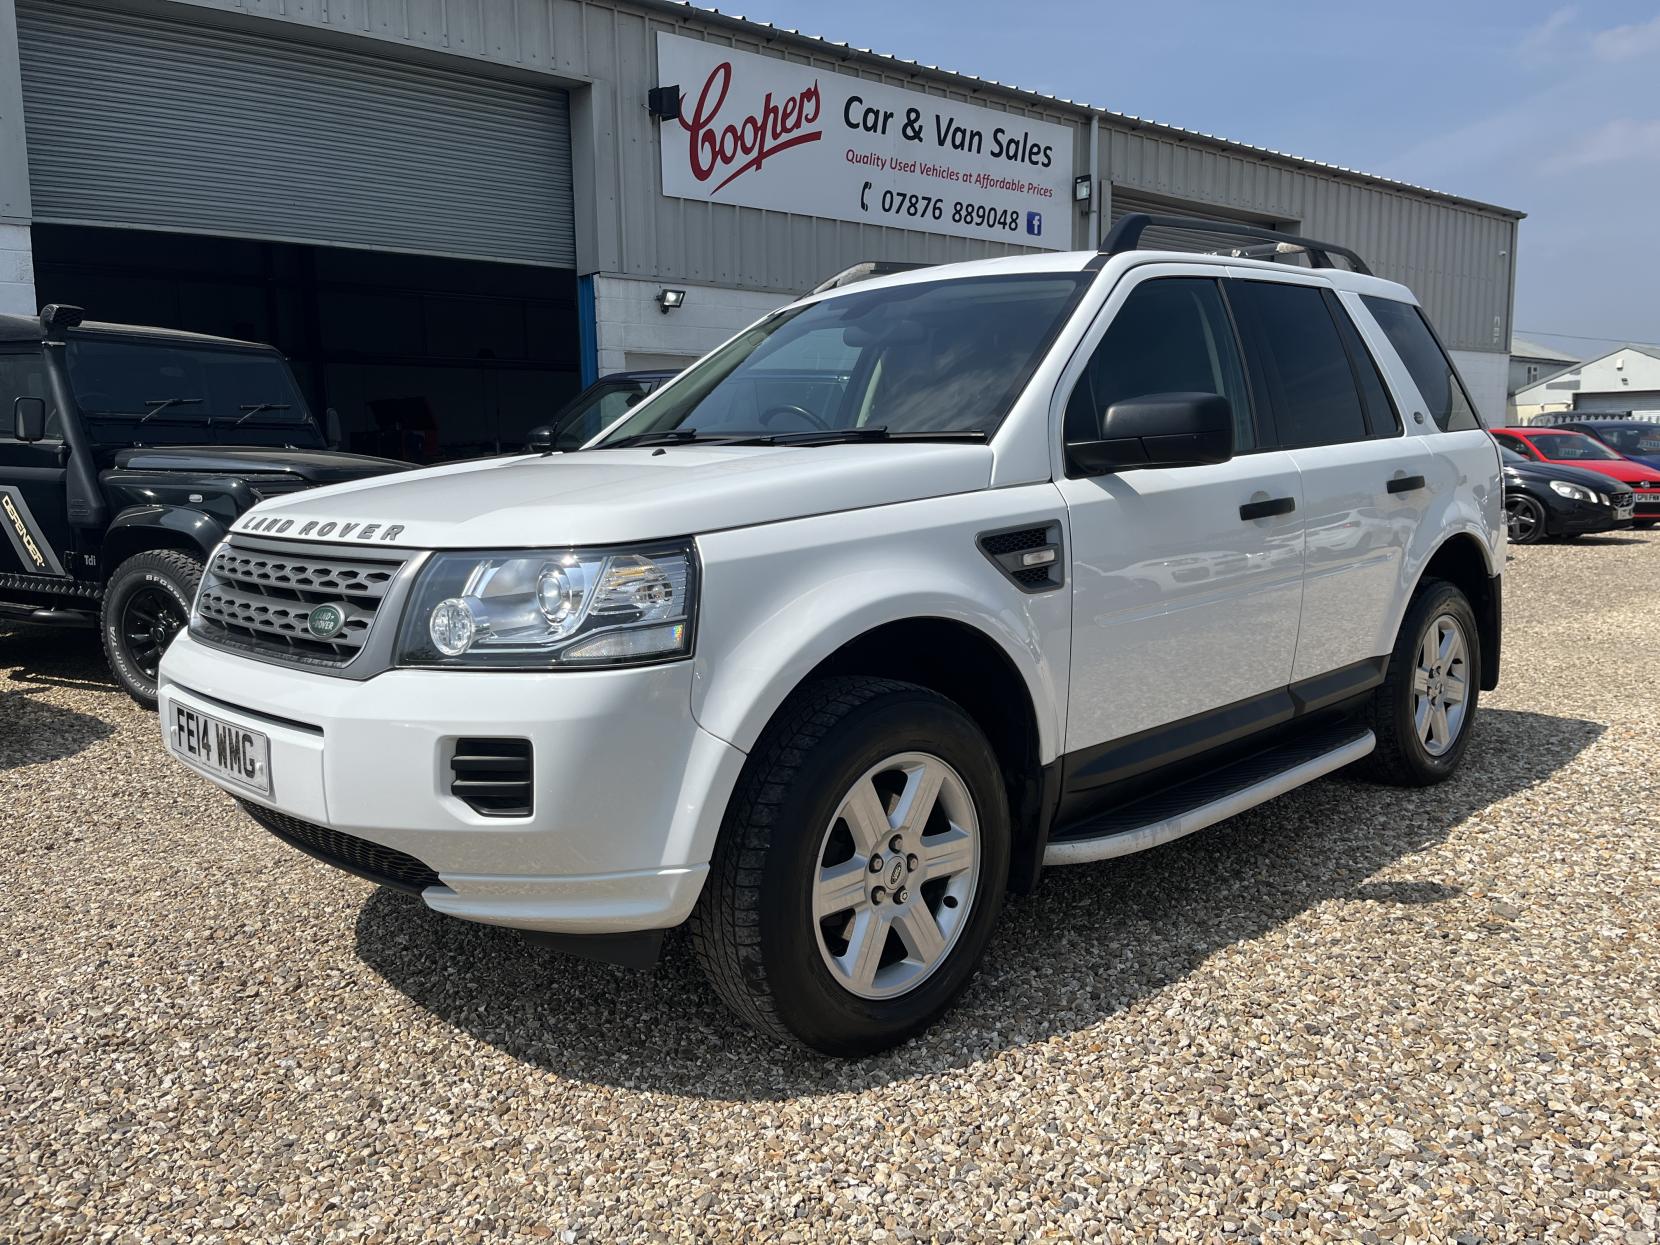 Land Rover Freelander 2 2.2 SD4 GS SUV 5dr Diesel CommandShift 4WD Euro 5 (190 ps)